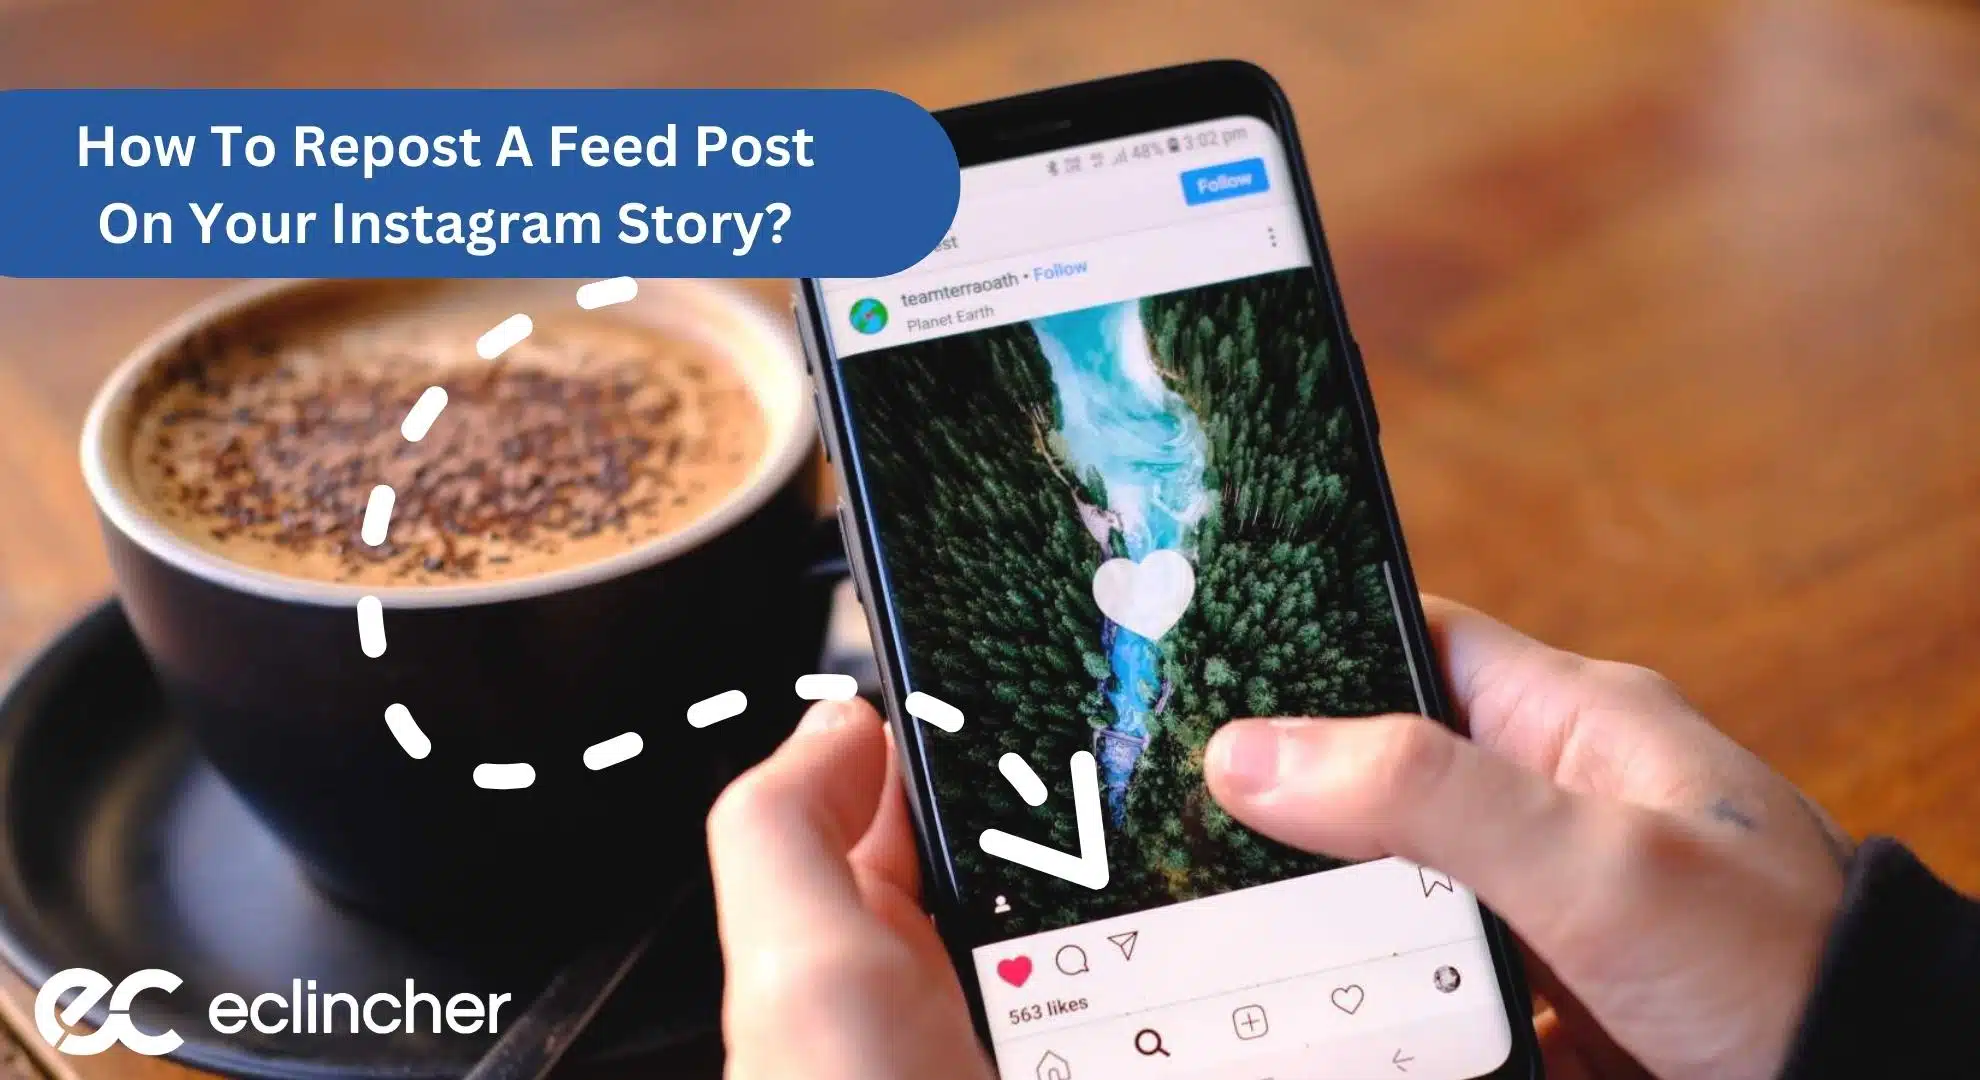 How To Repost A Feed Post On Your Instagram Story